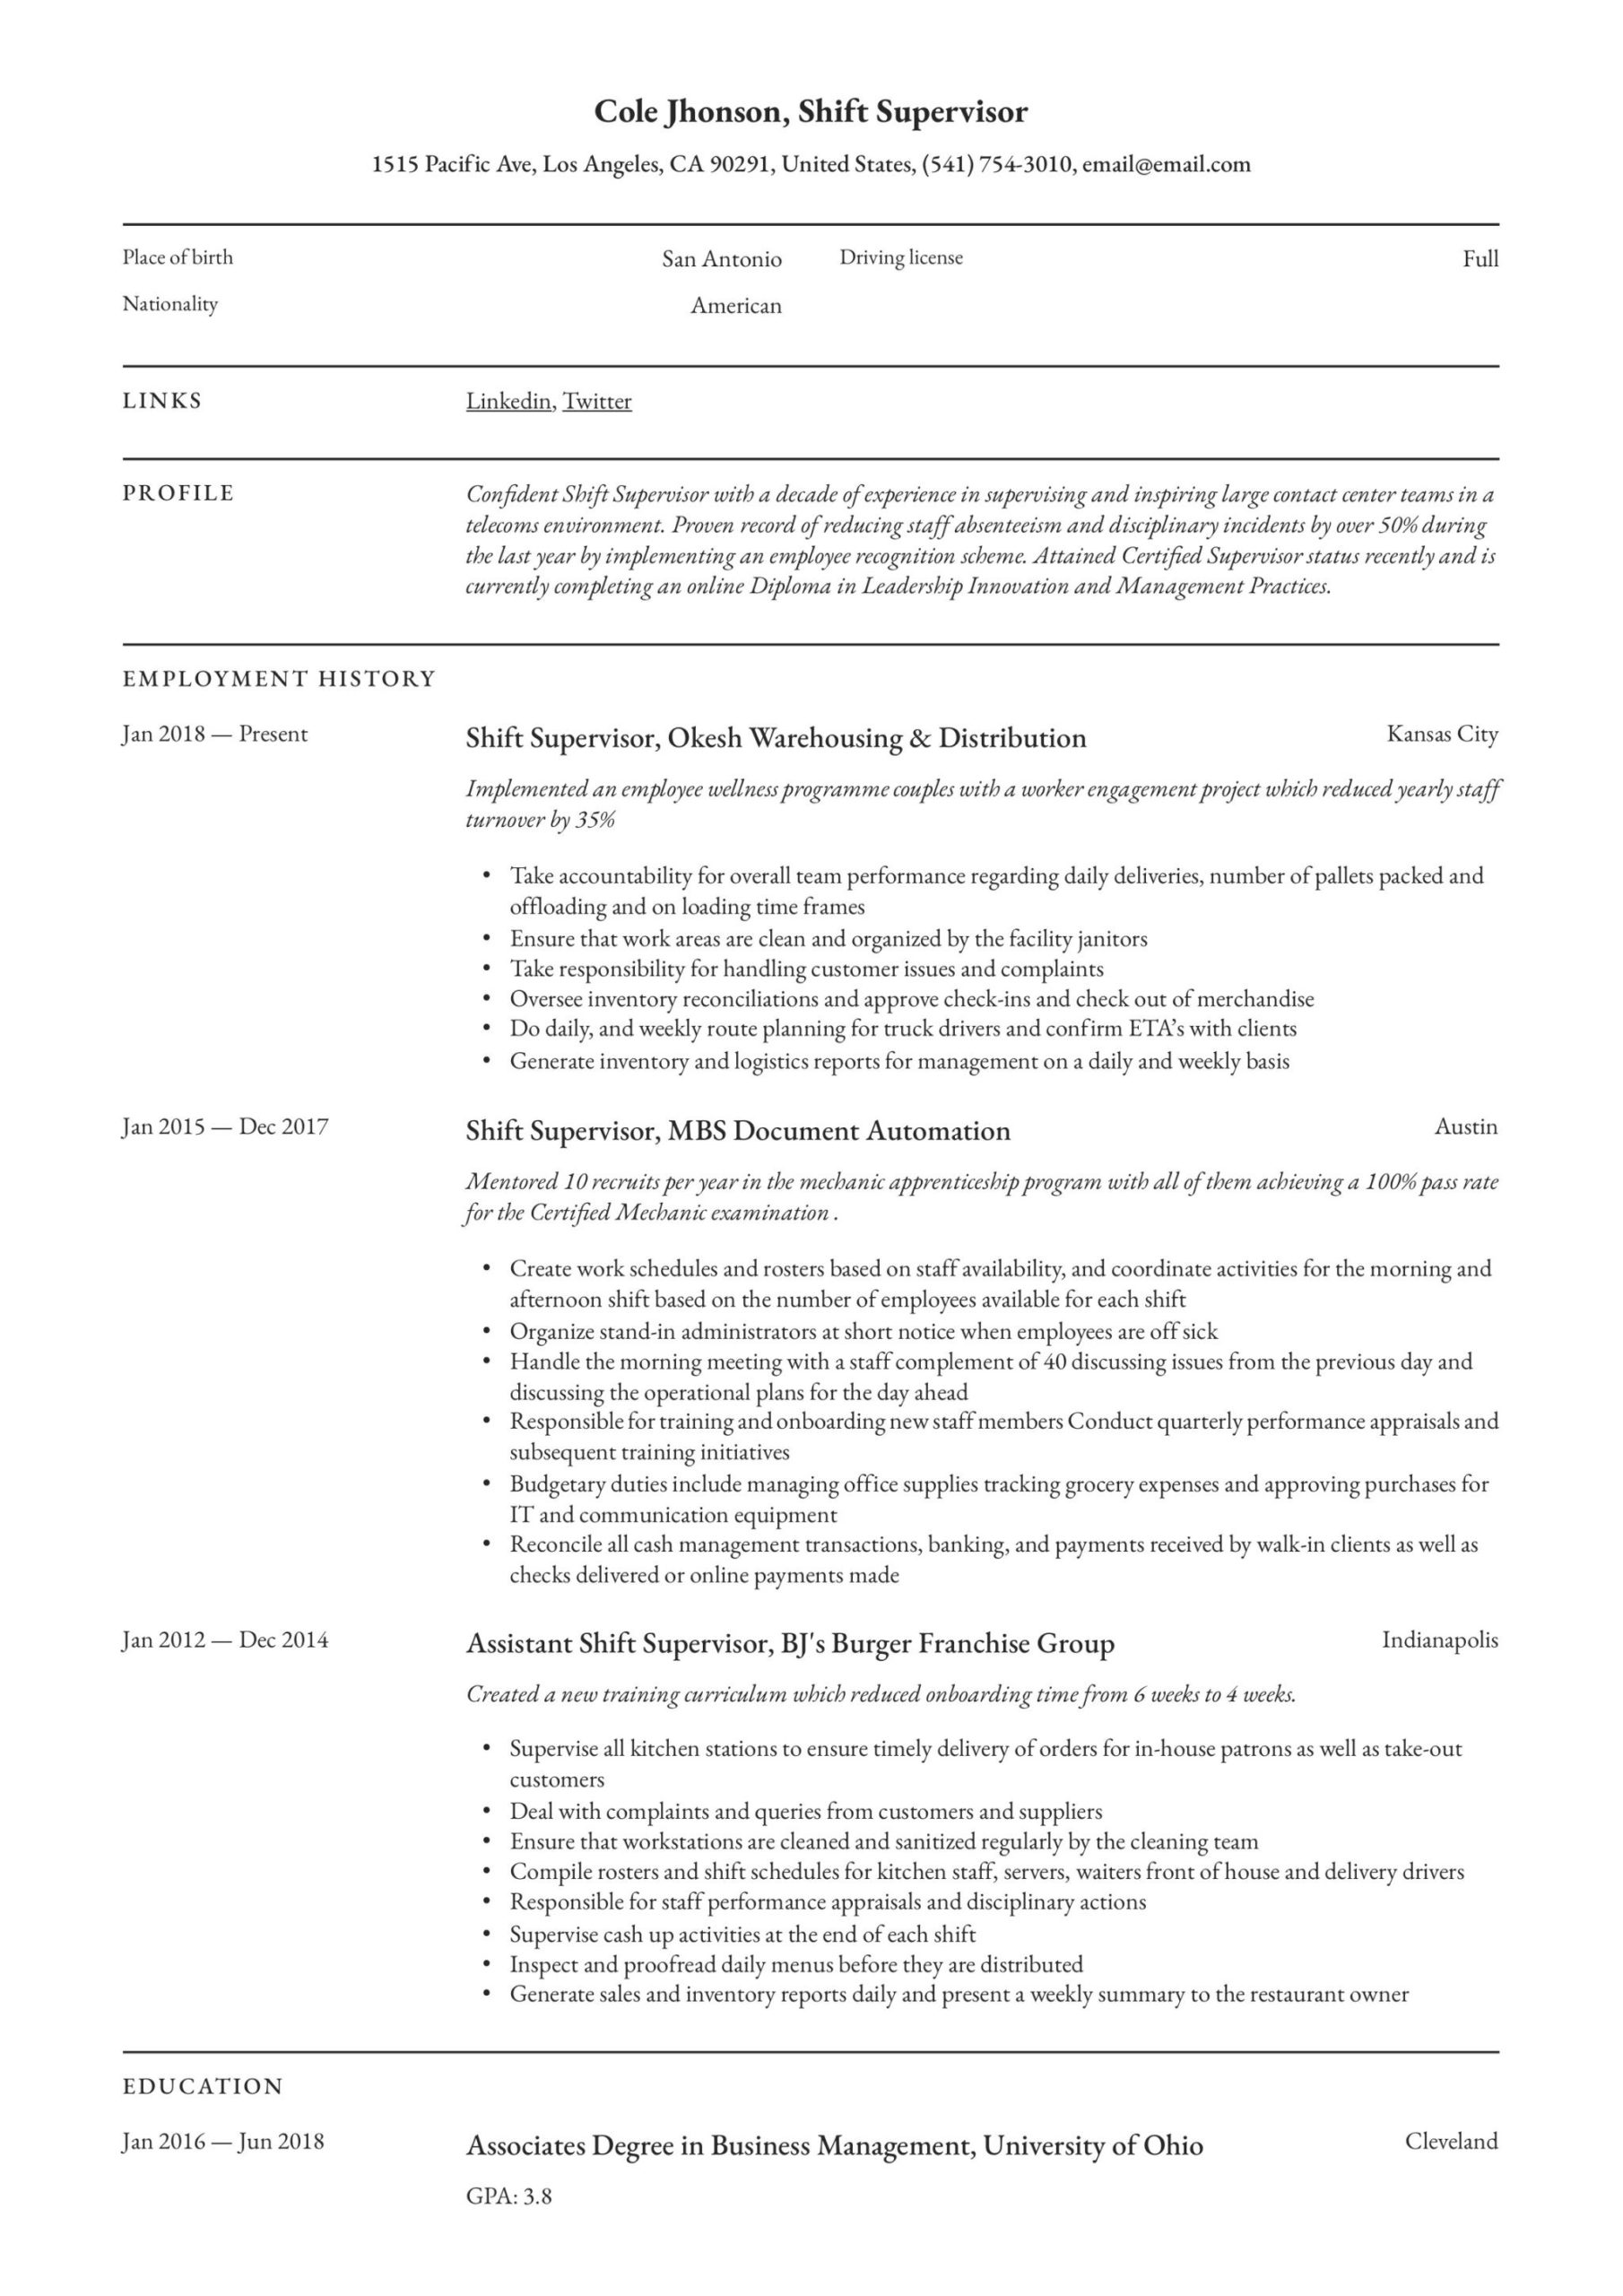 Sample Resume for Group Home Manager Shift Supervisor Resume & Writing Guide  12 Templates 2020